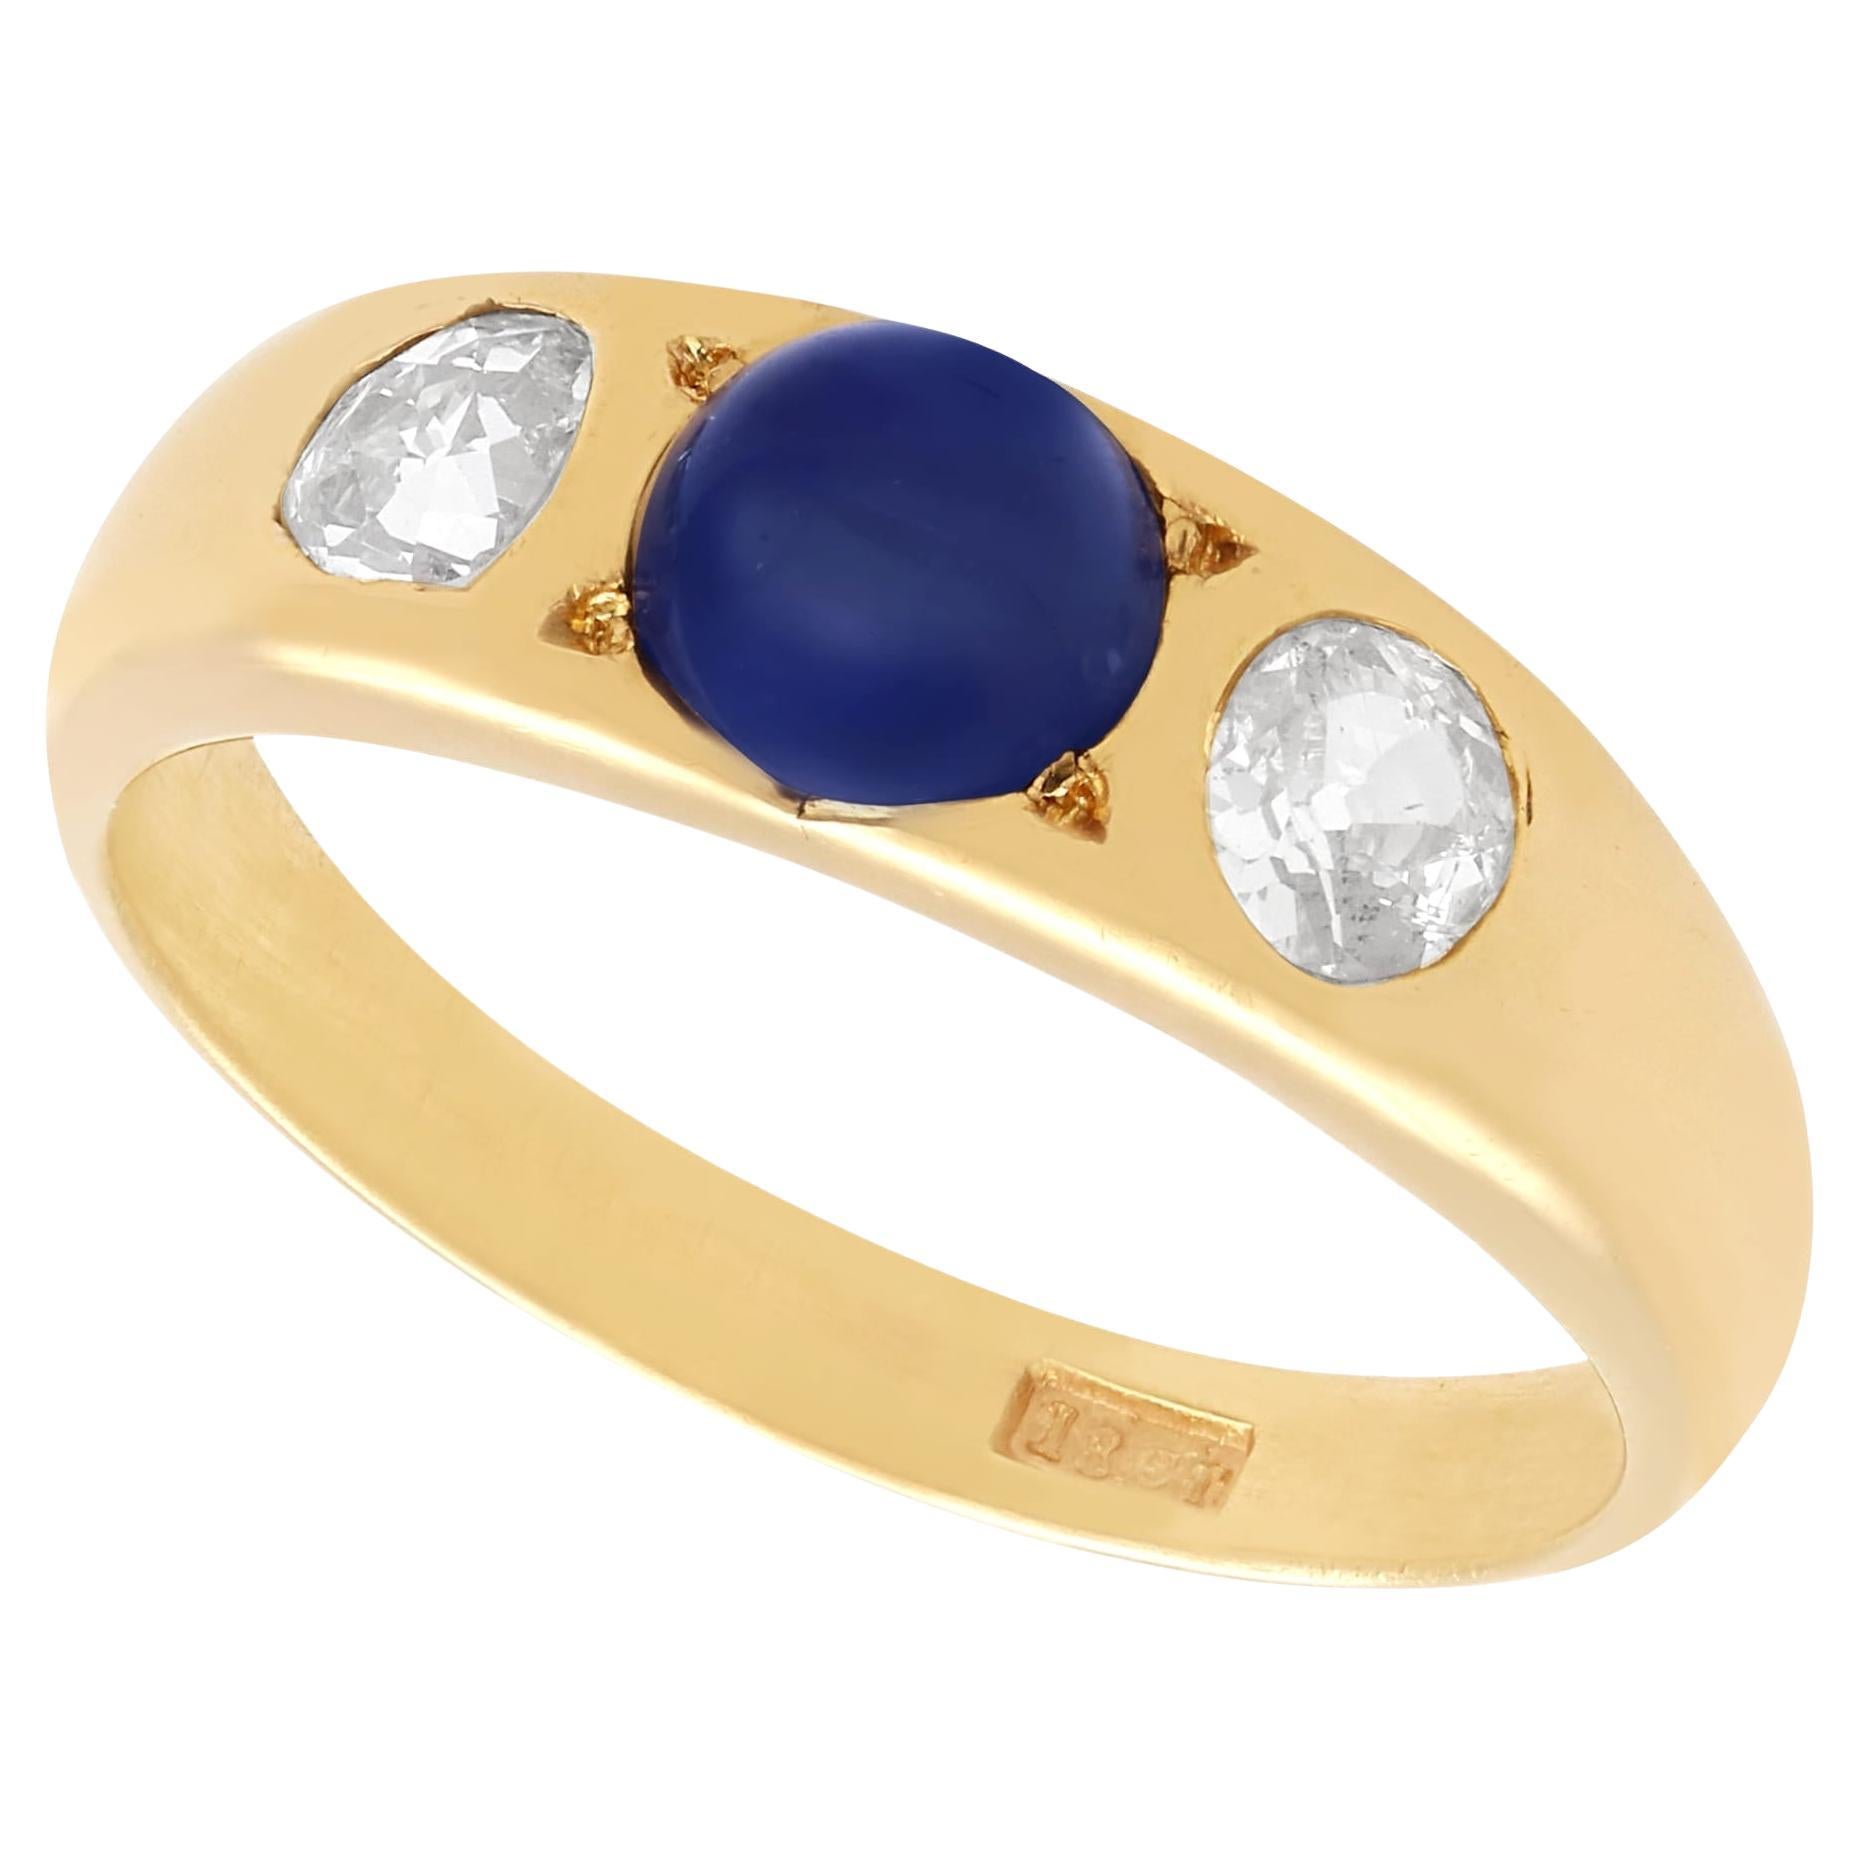 Vintage 1.93Ct Sapphire and 0.63Ct Diamond 18k Yellow Gold Dress Ring Circa 1940 For Sale